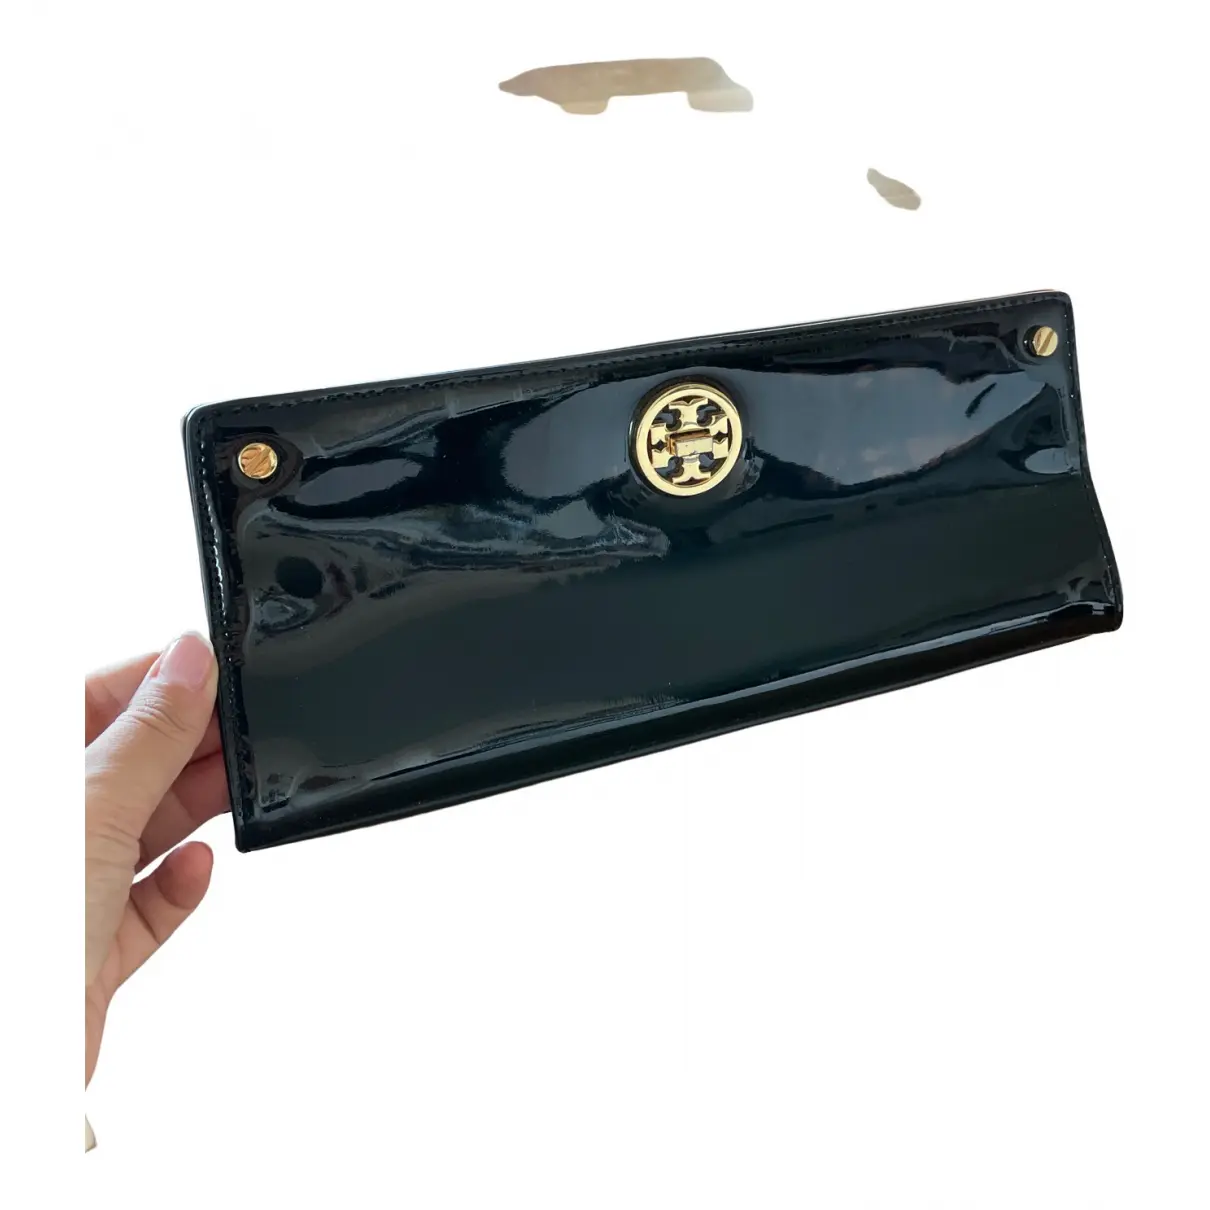 Patent leather clutch bag Tory Burch